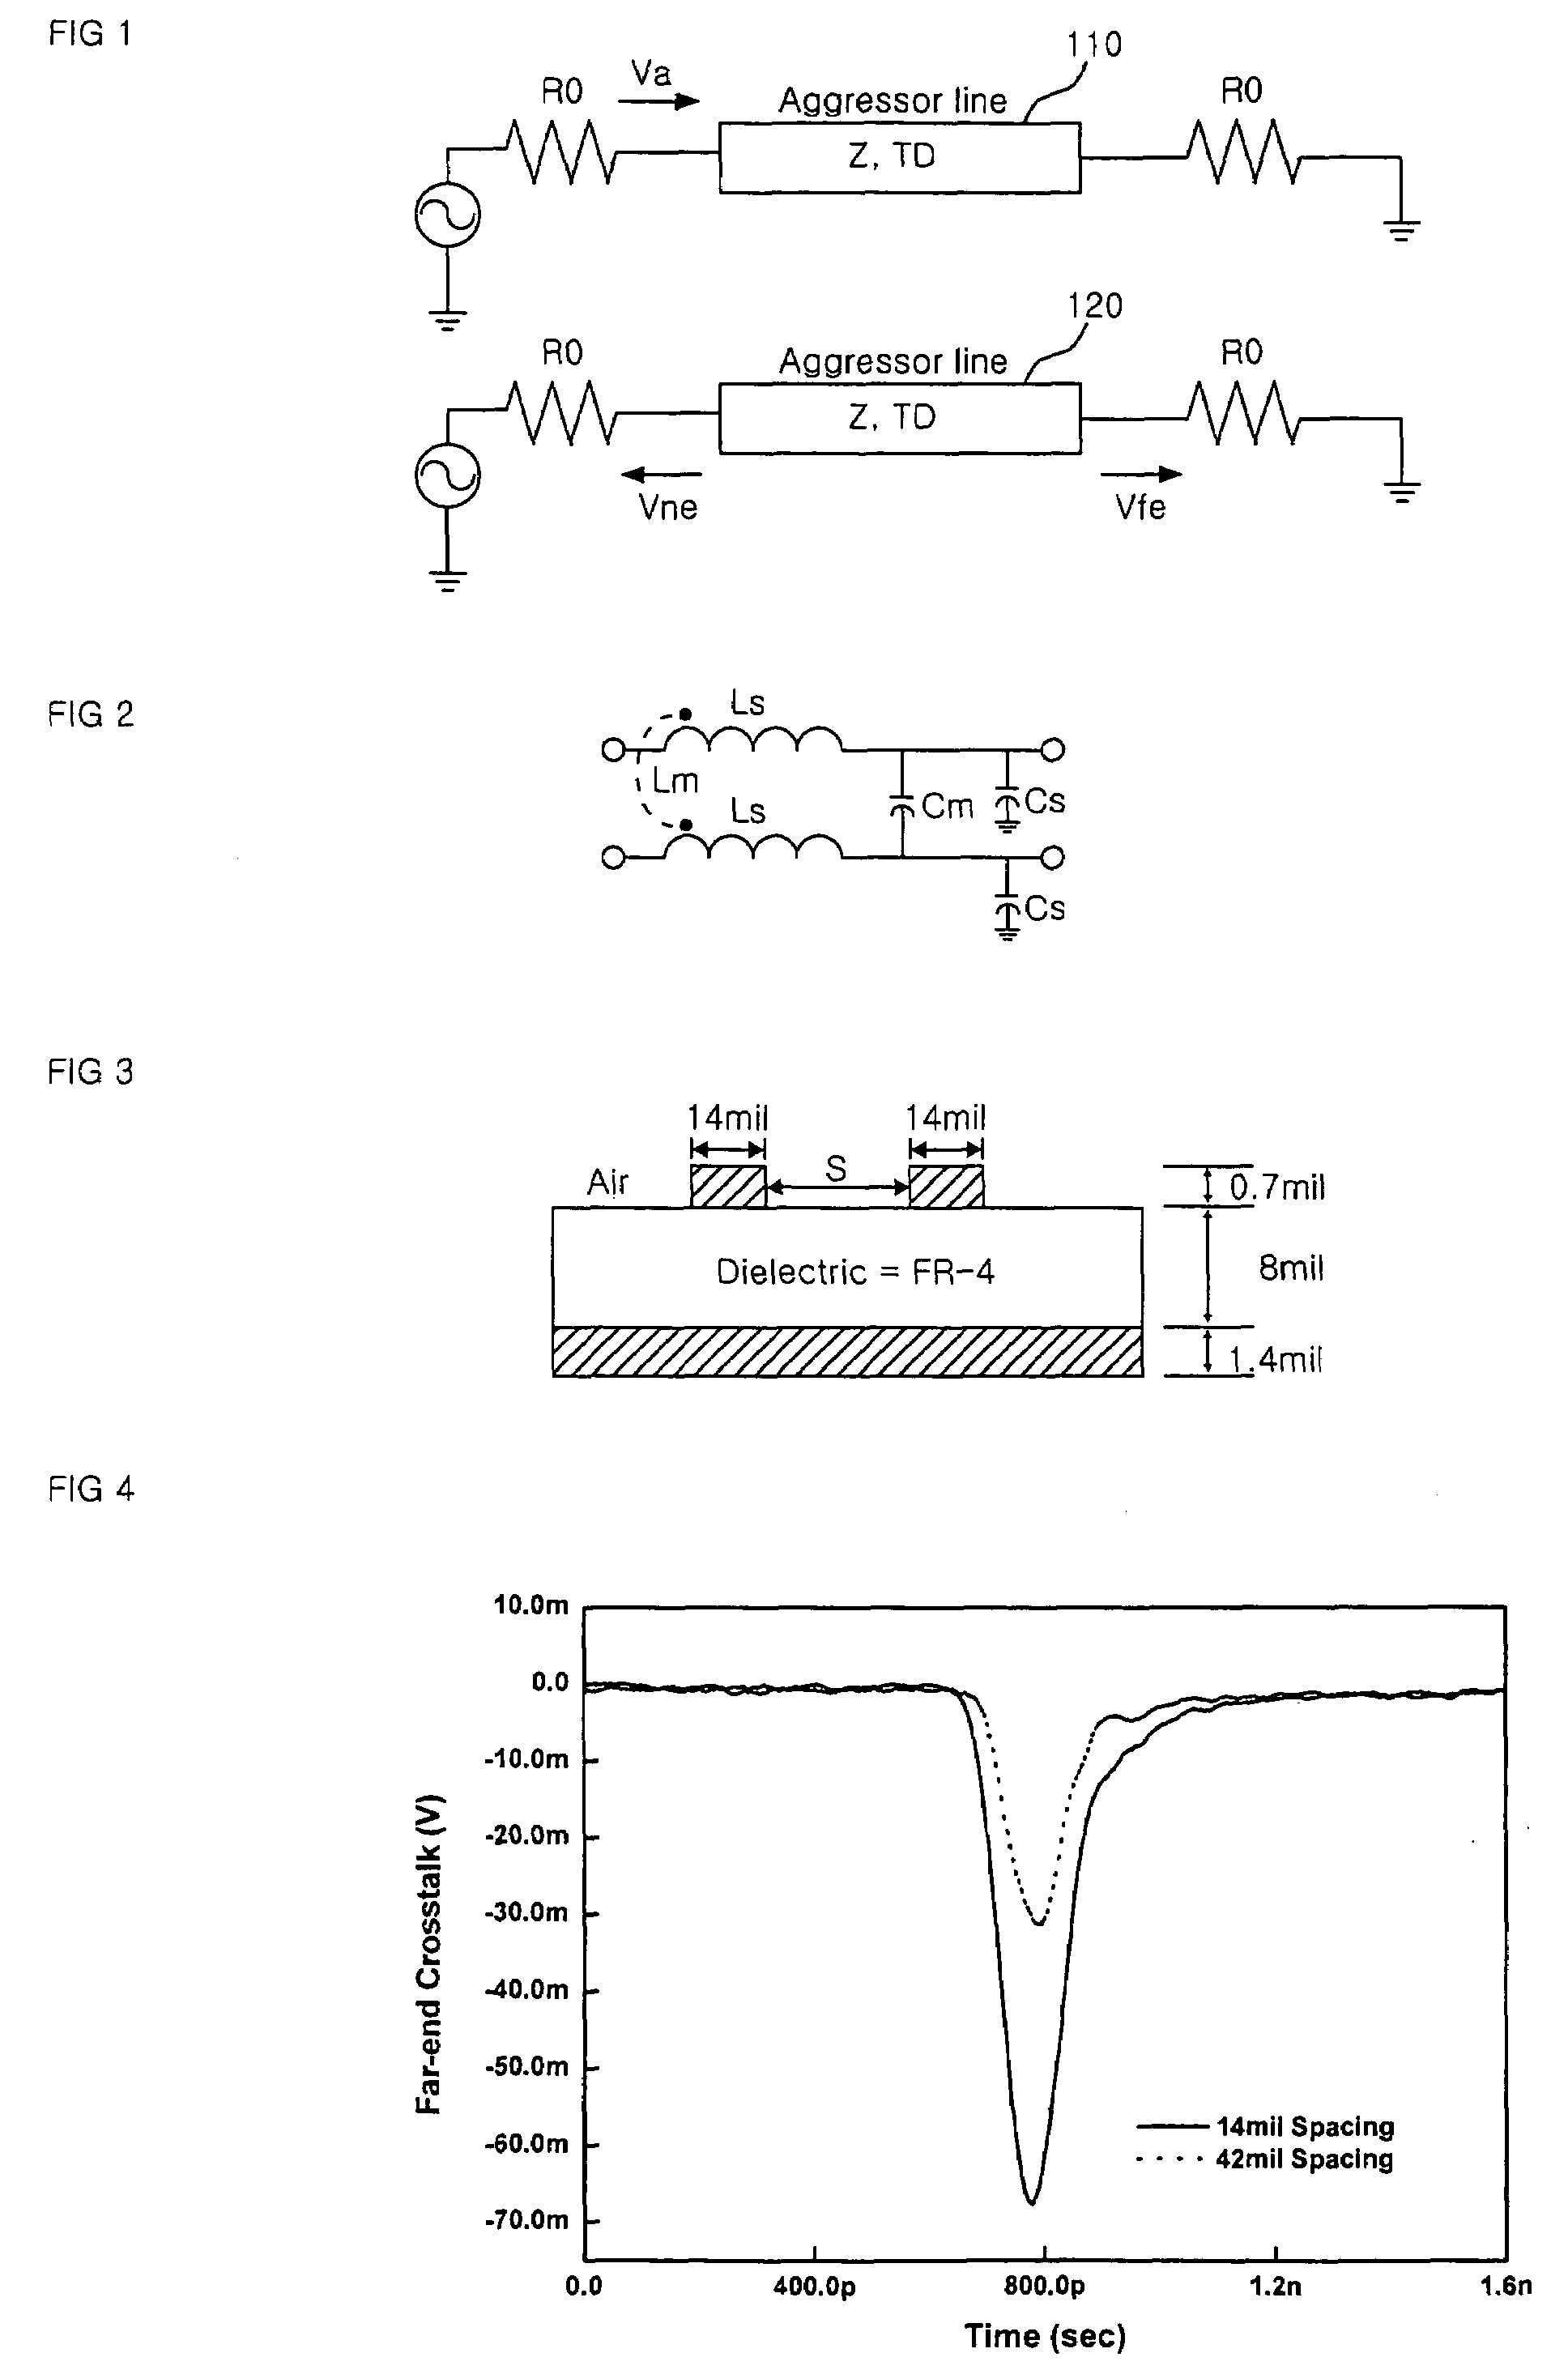 Serpentine guard trace for reducing crosstalk of micro-strip line on printed circuit board